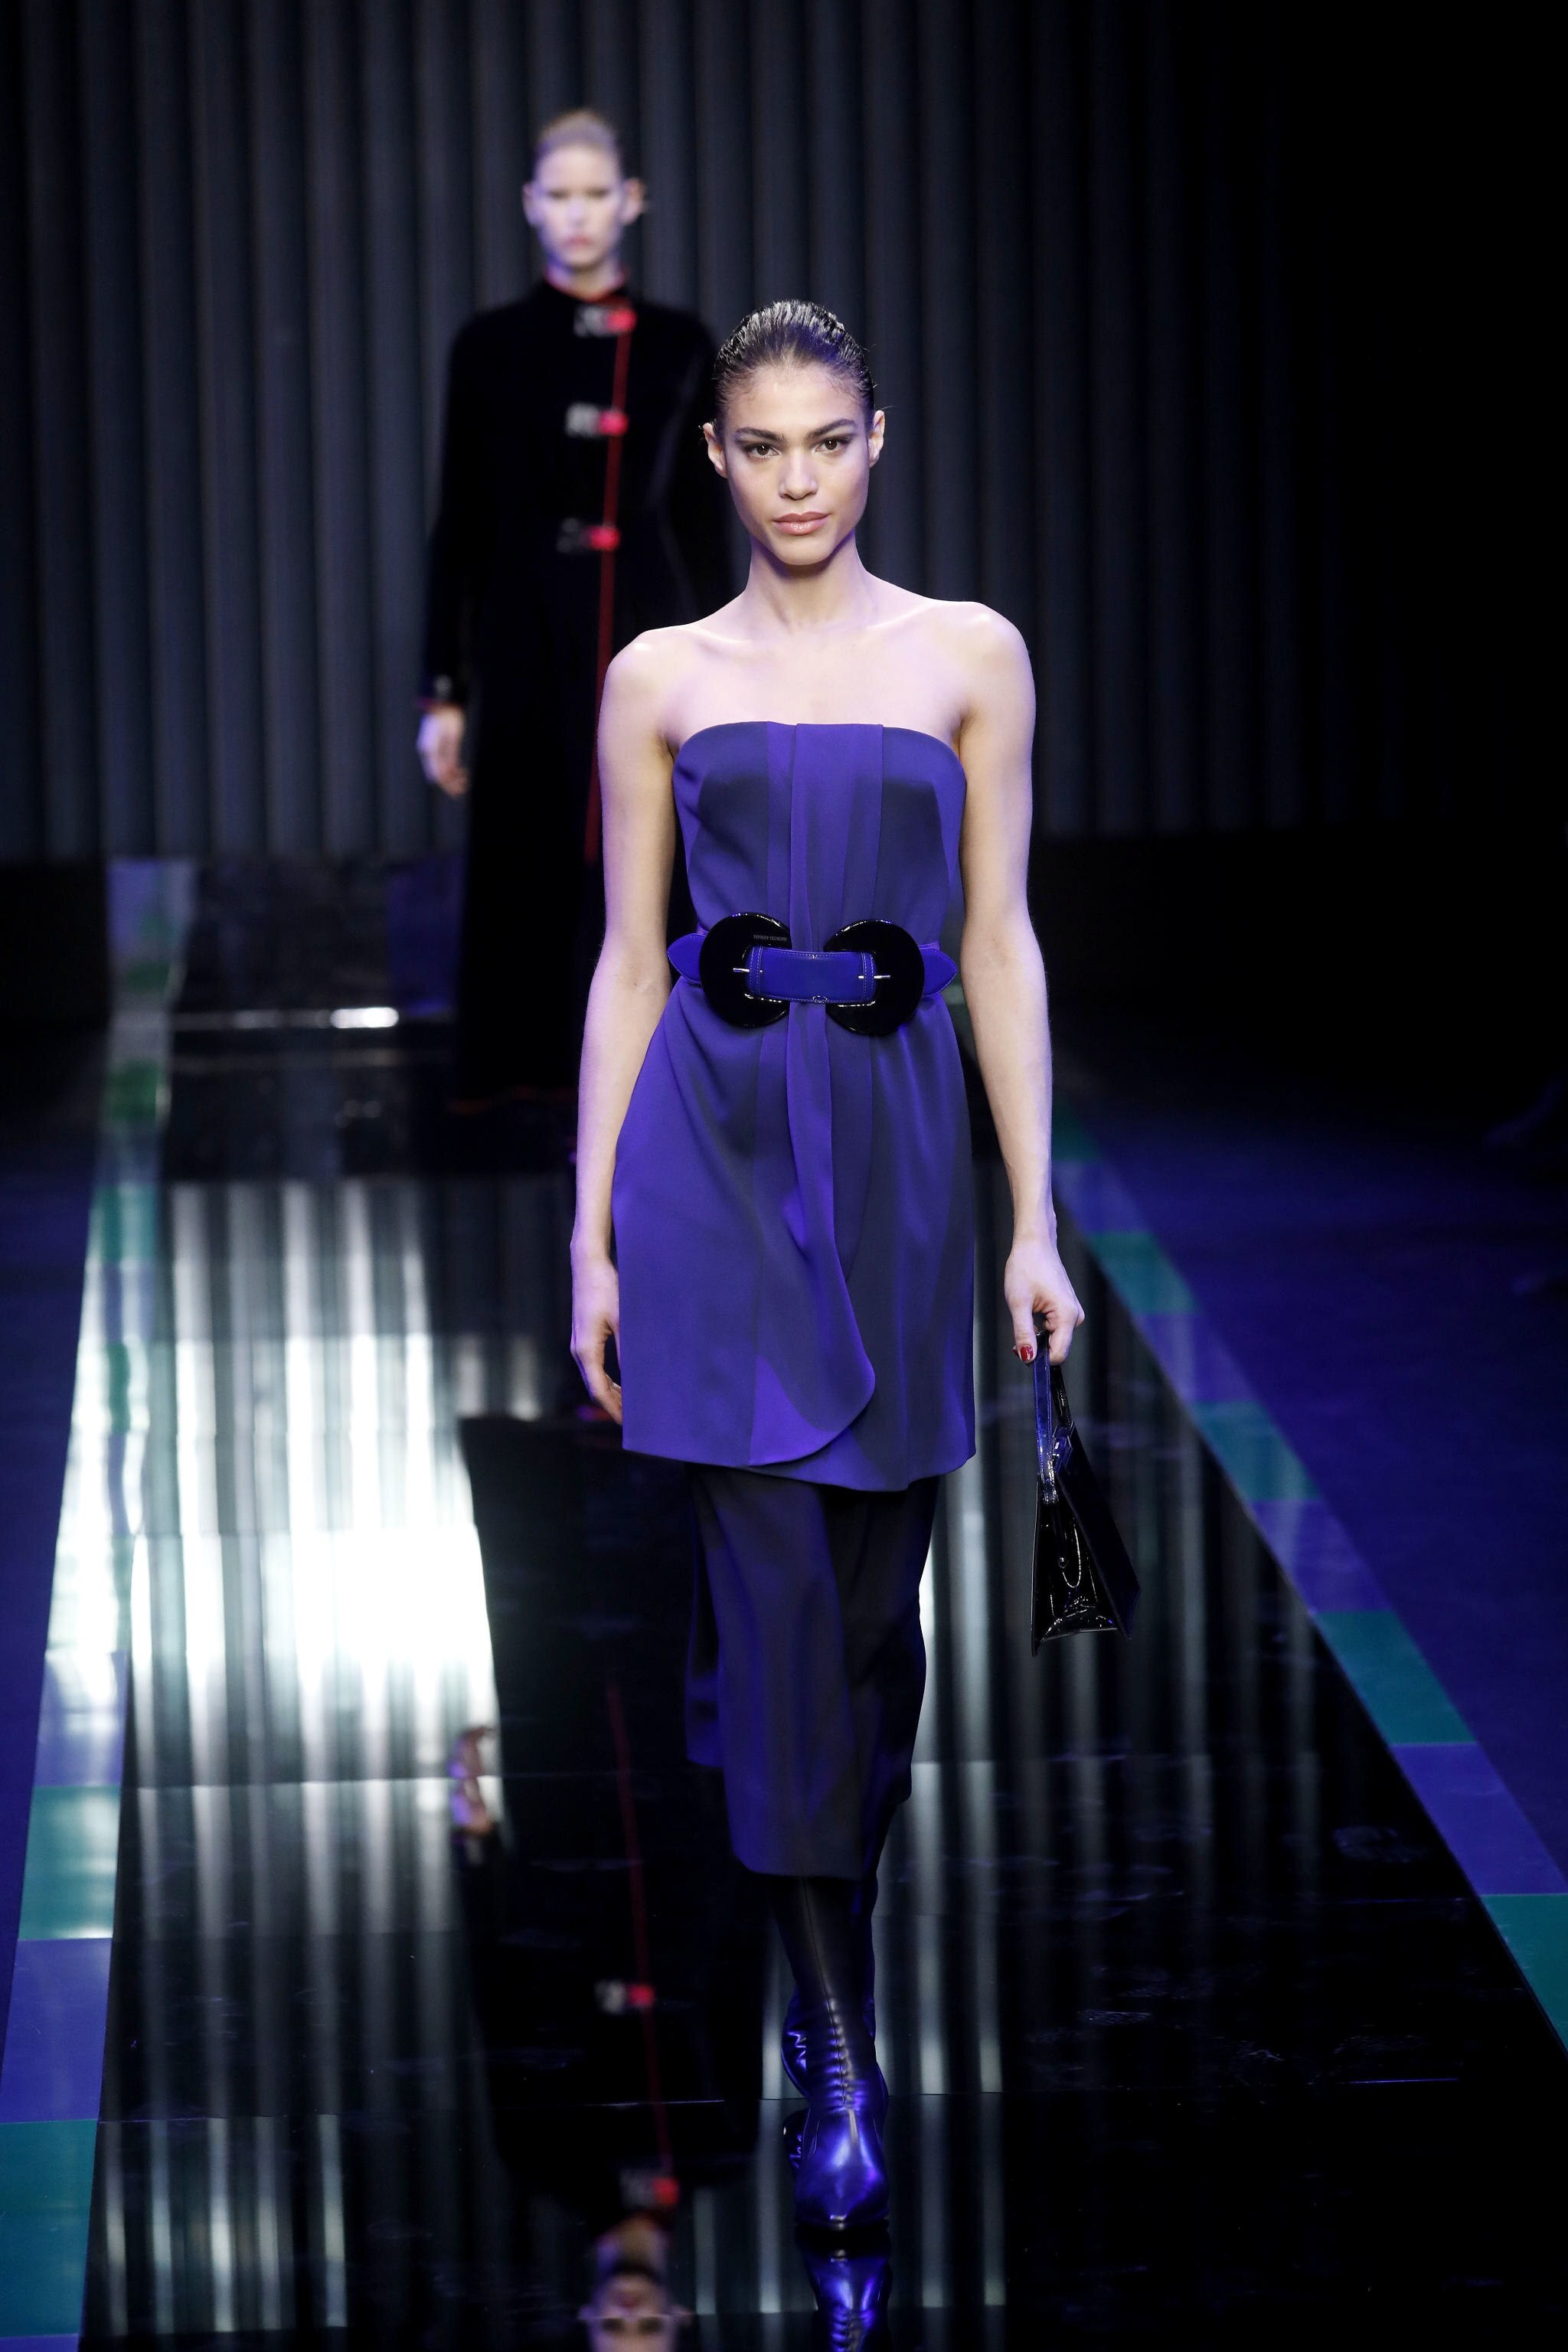 A model presents a creation by Italian designer Giorgio Armani for his label Emporio Armani during the Milan Women’s Fashion Week in Milan, Italy, on February 27. Photo: EPA-EFE